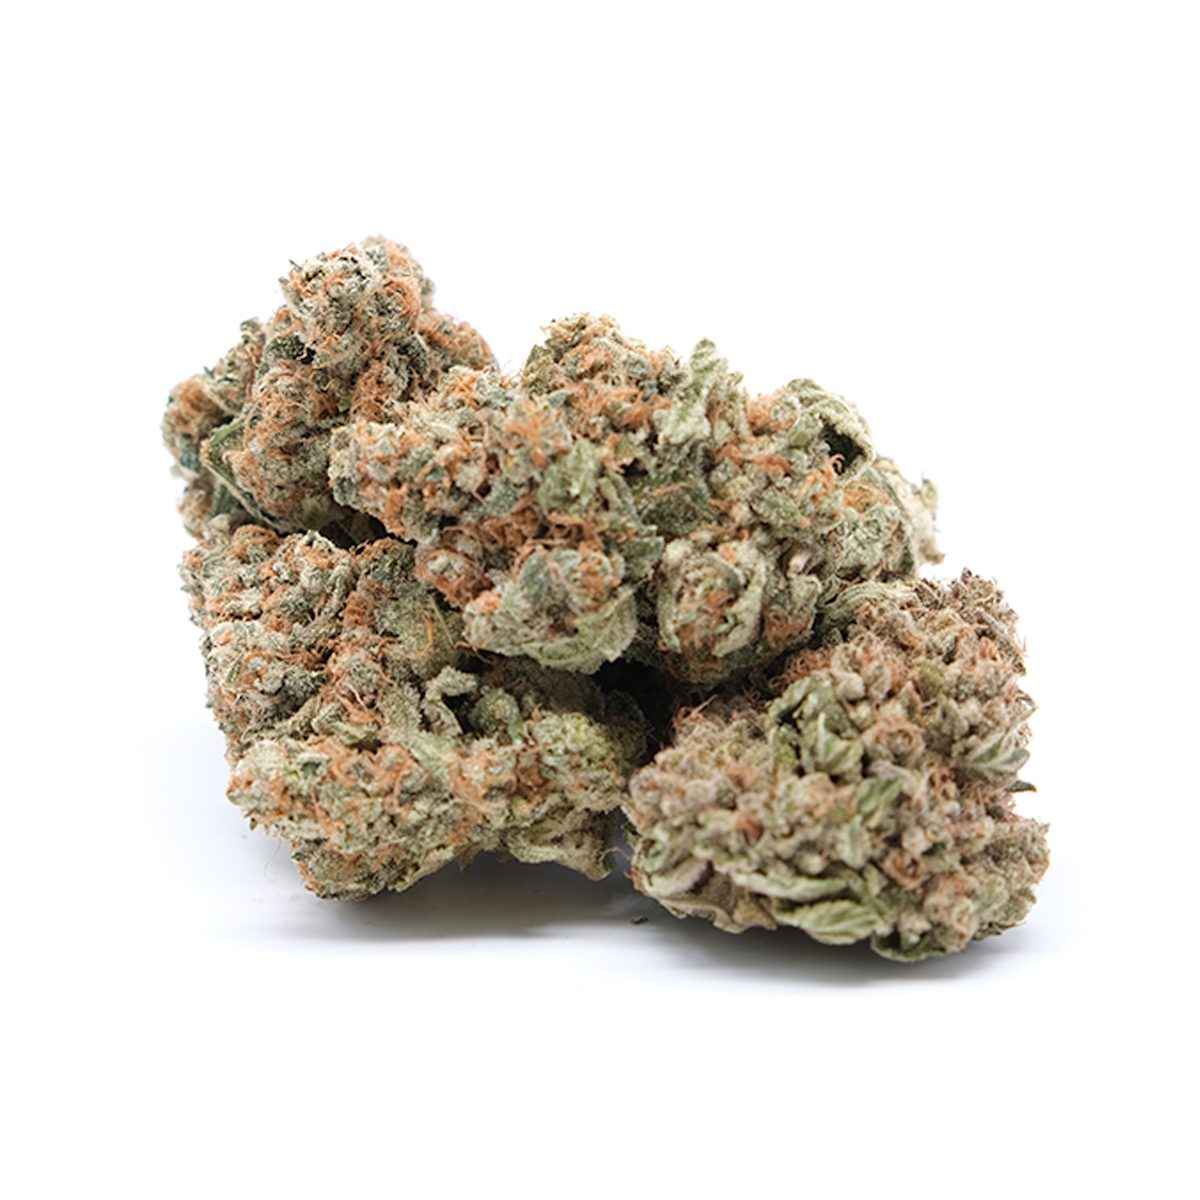 9lb-Hammer-by-Queen-Of-Quads—Indica-Dominant-Hybrid-(AAAA+)2